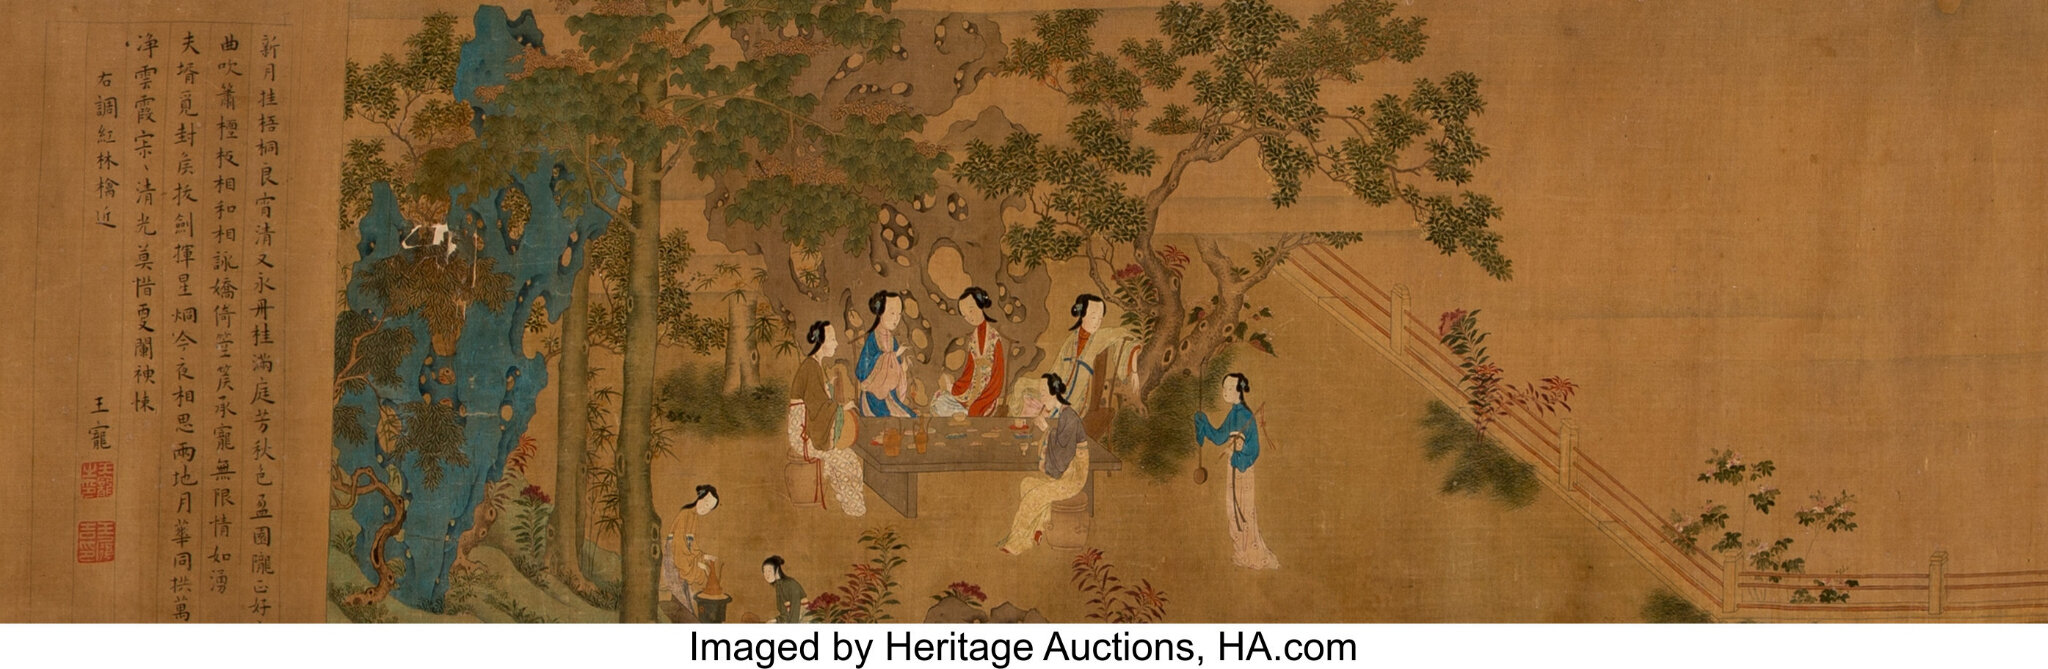 Chenn Collection Highlights Heritage Auction S Inaugural